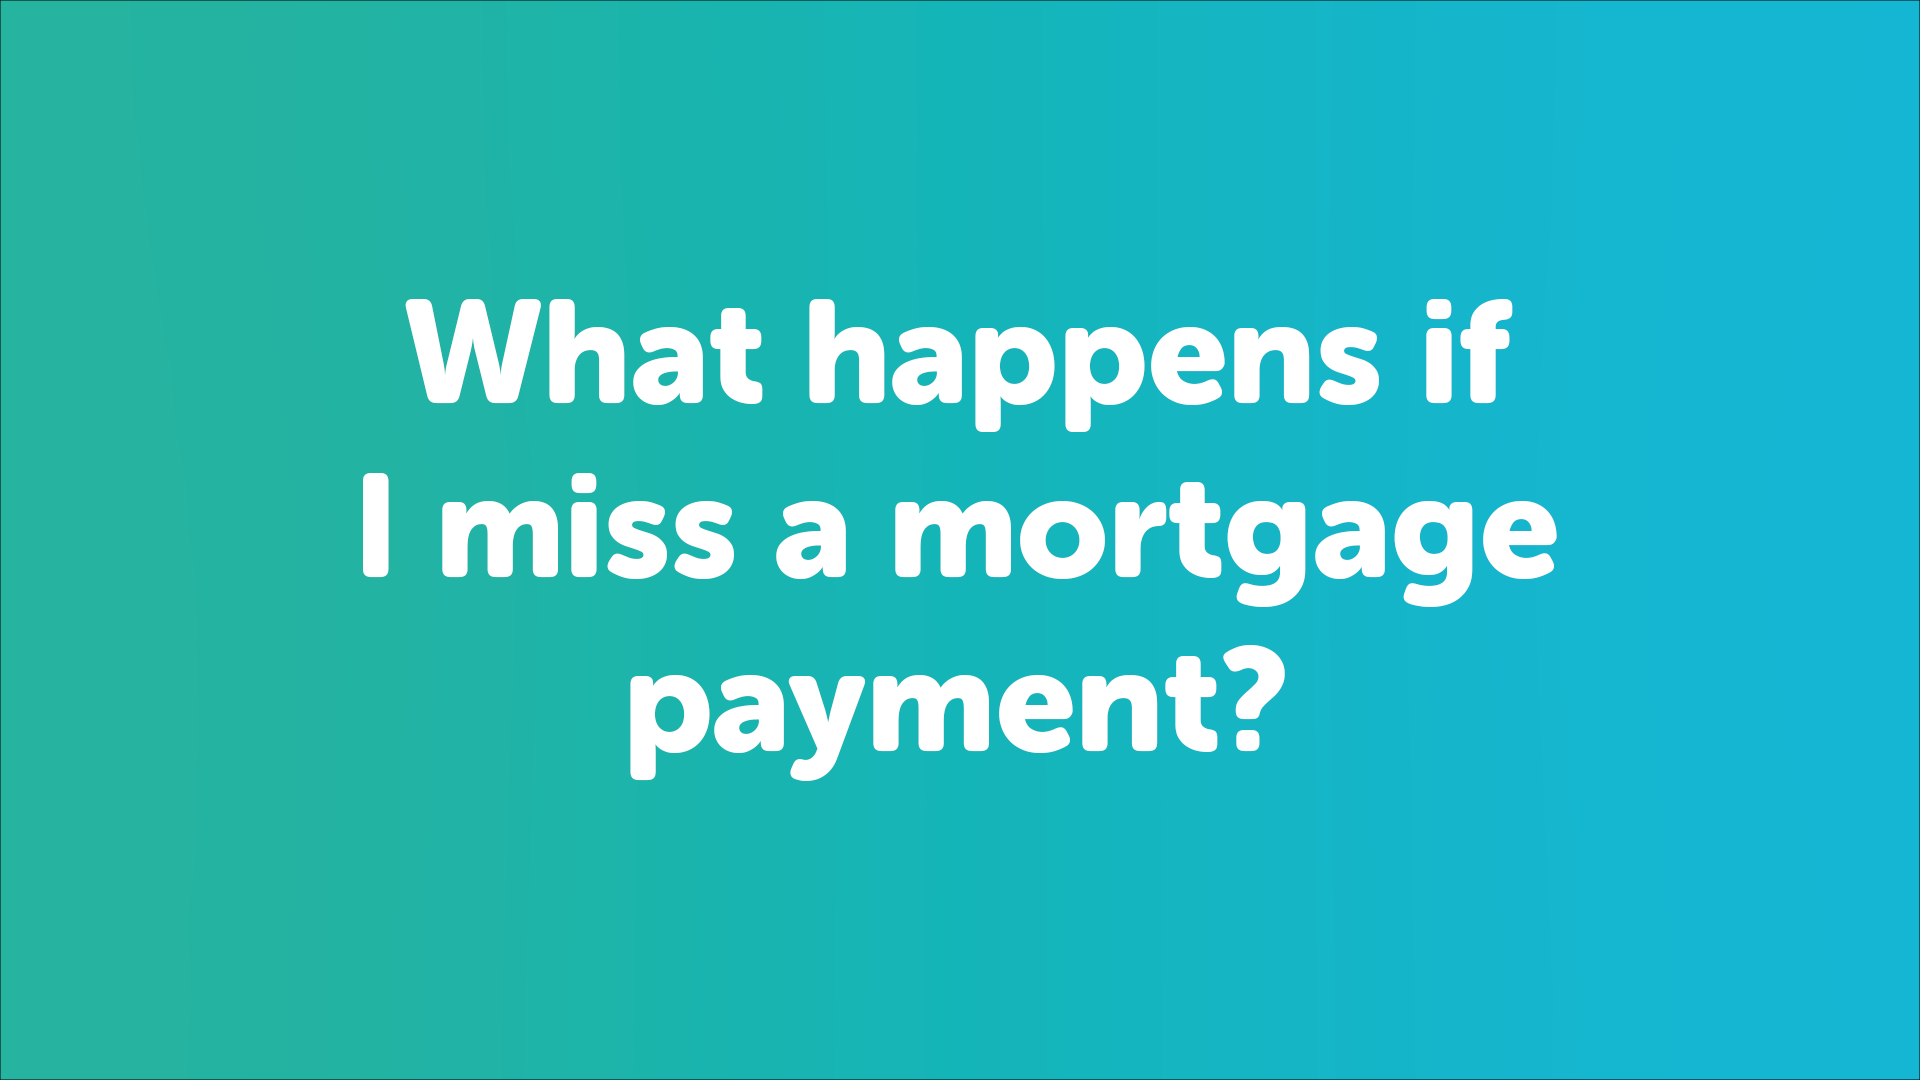 What to do if I Miss a Mortgage Payment?